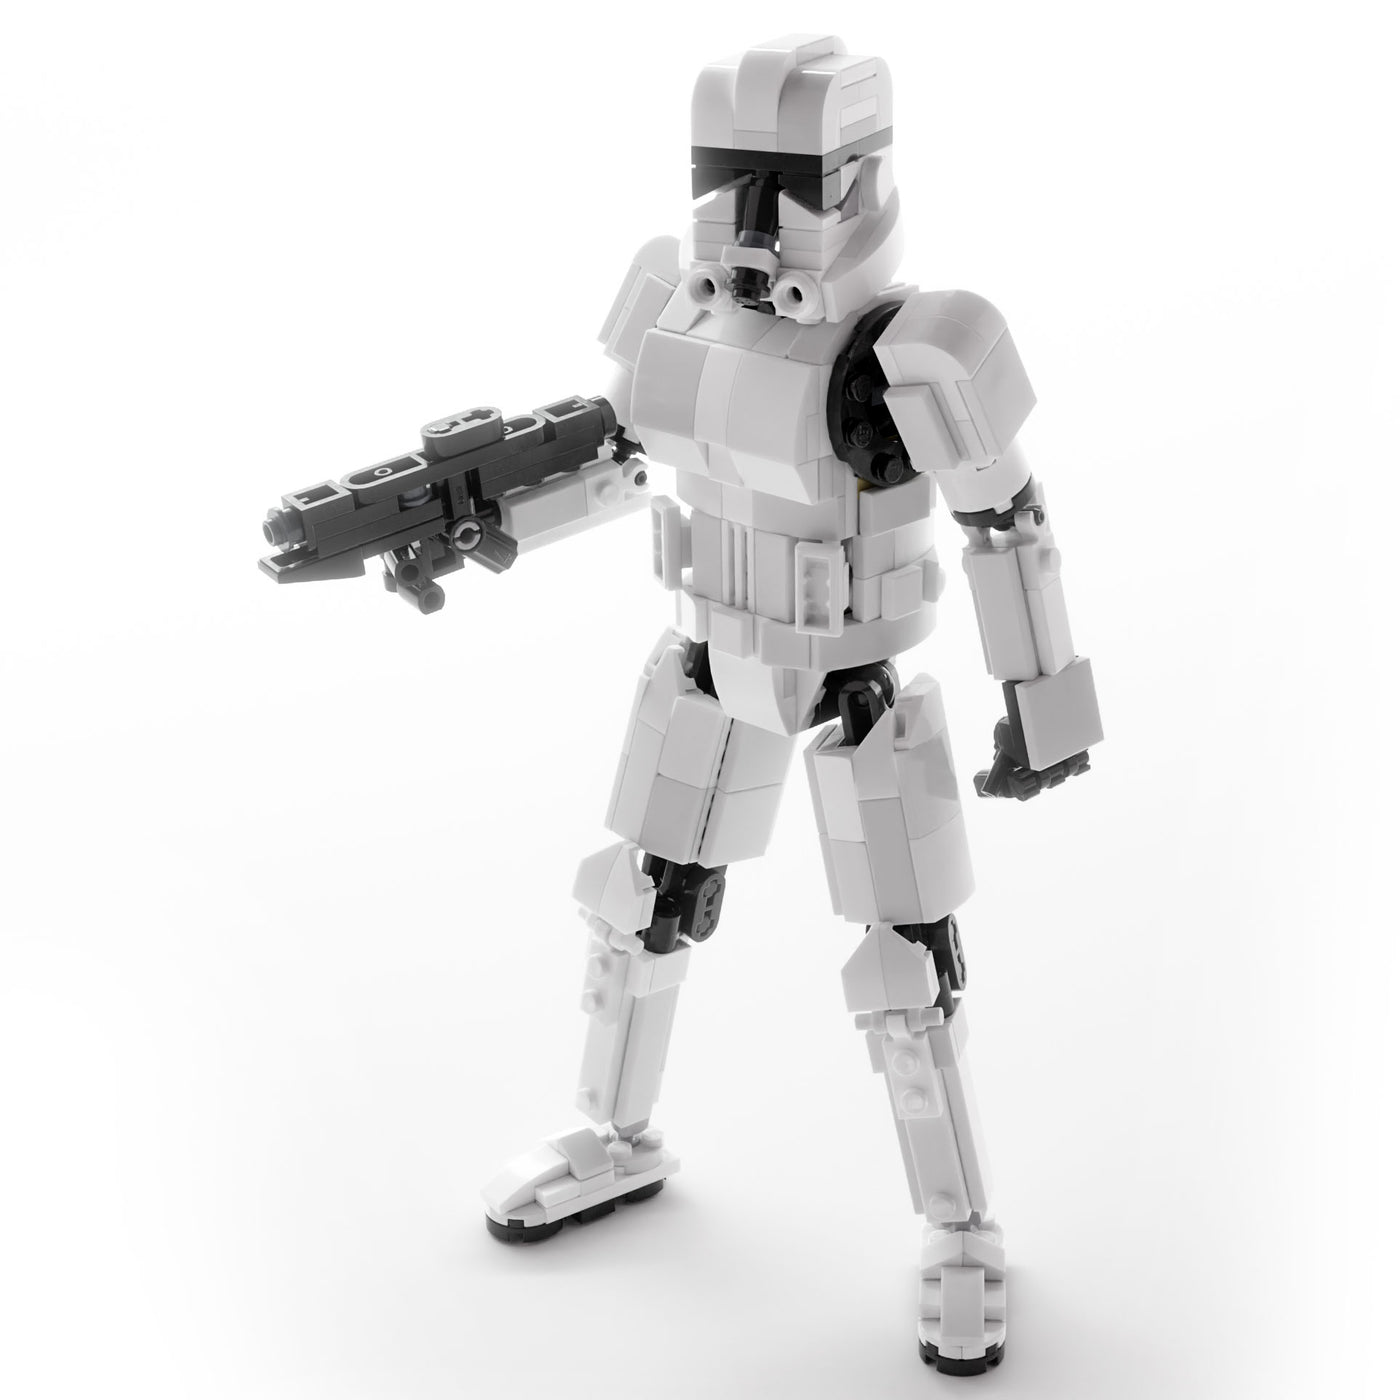 Instructions for Custom Lego Star Wars Phase 1 Clone Trooper